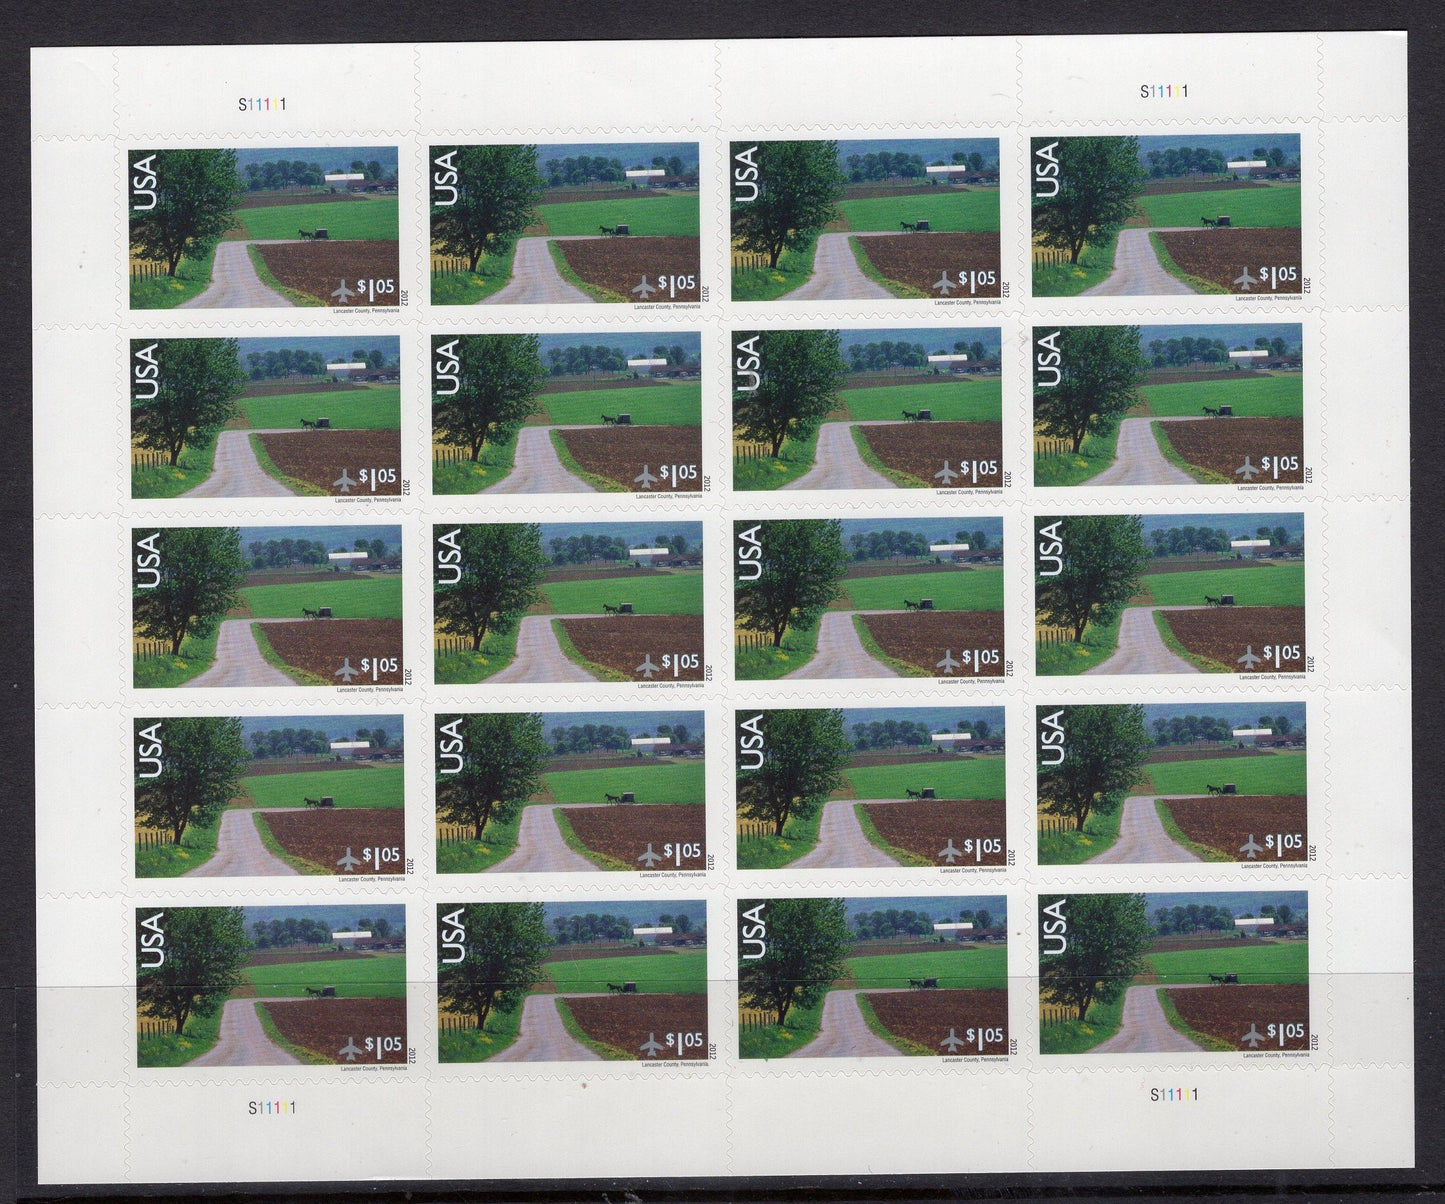 AMISH LANCASTER PA Horse Buggy Sheet of 20 Scenic Landscape Stamps Fresh, Bright Post Office - Issued in 2012 - sC150 M -